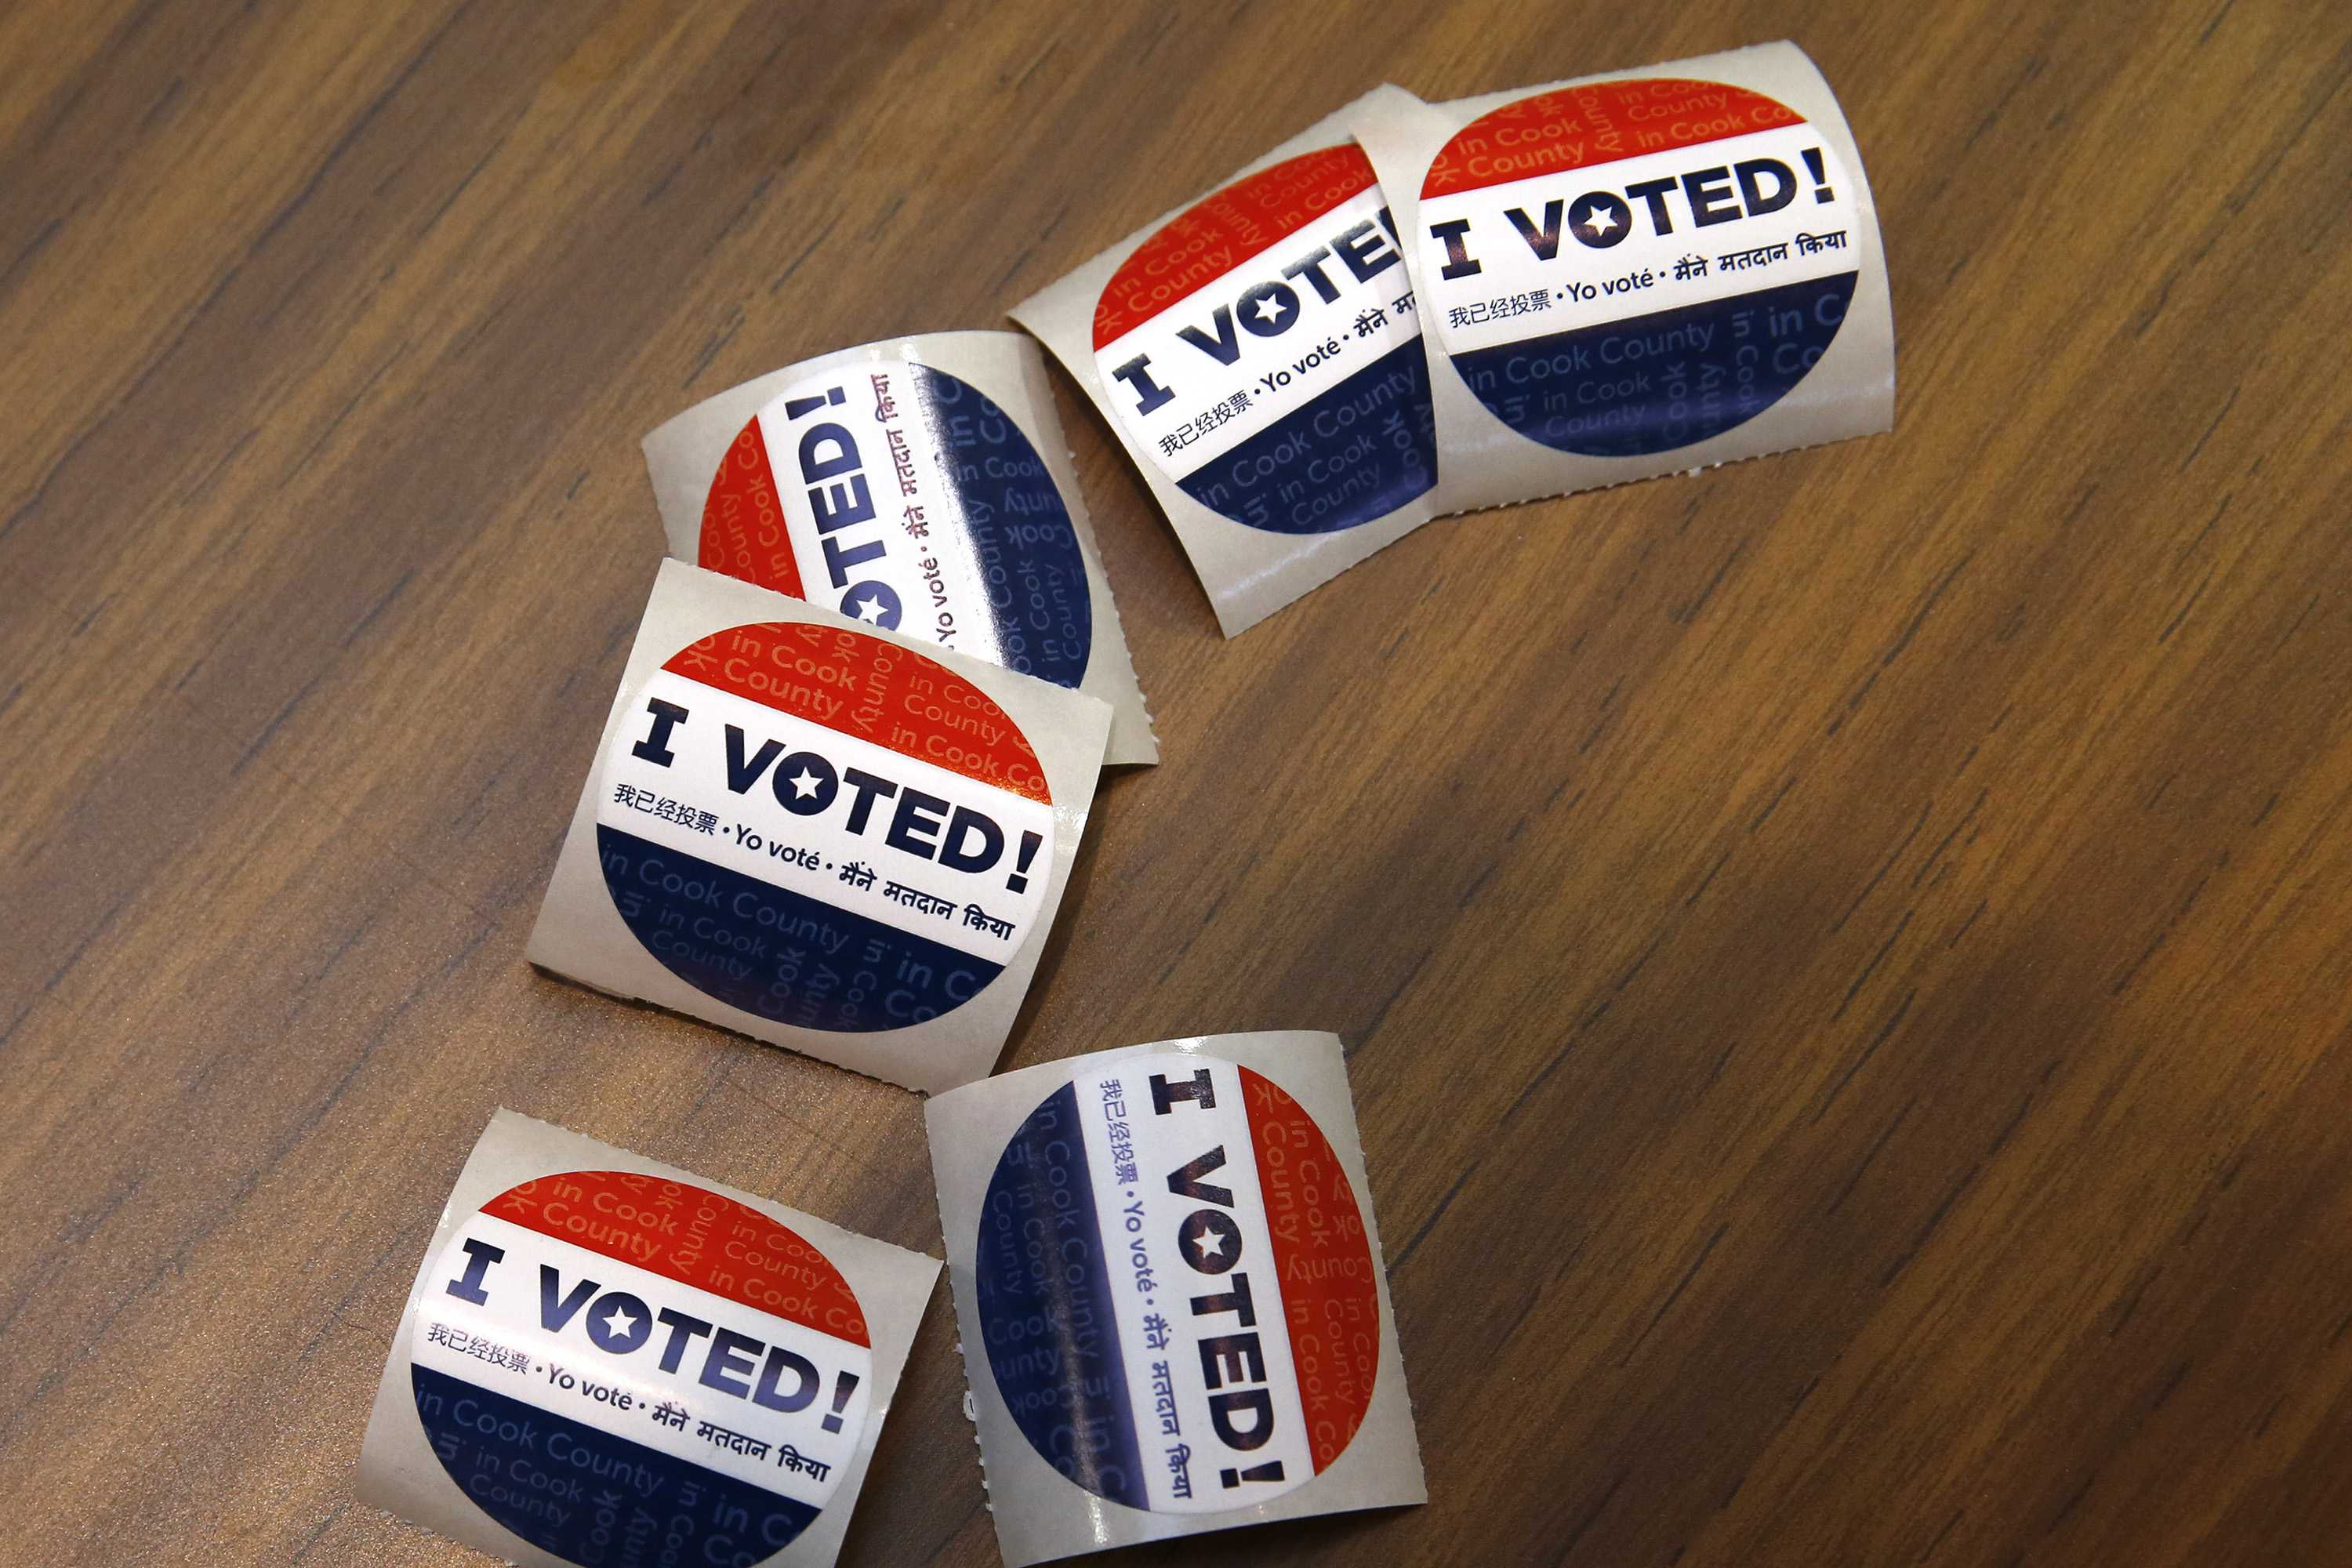 Voting stickers at First Presbyterian Church in River Forest on Tuesday, March 15, 2016 in Chicago. (Jose M. Osorio/Chicago Tribune/TNS)